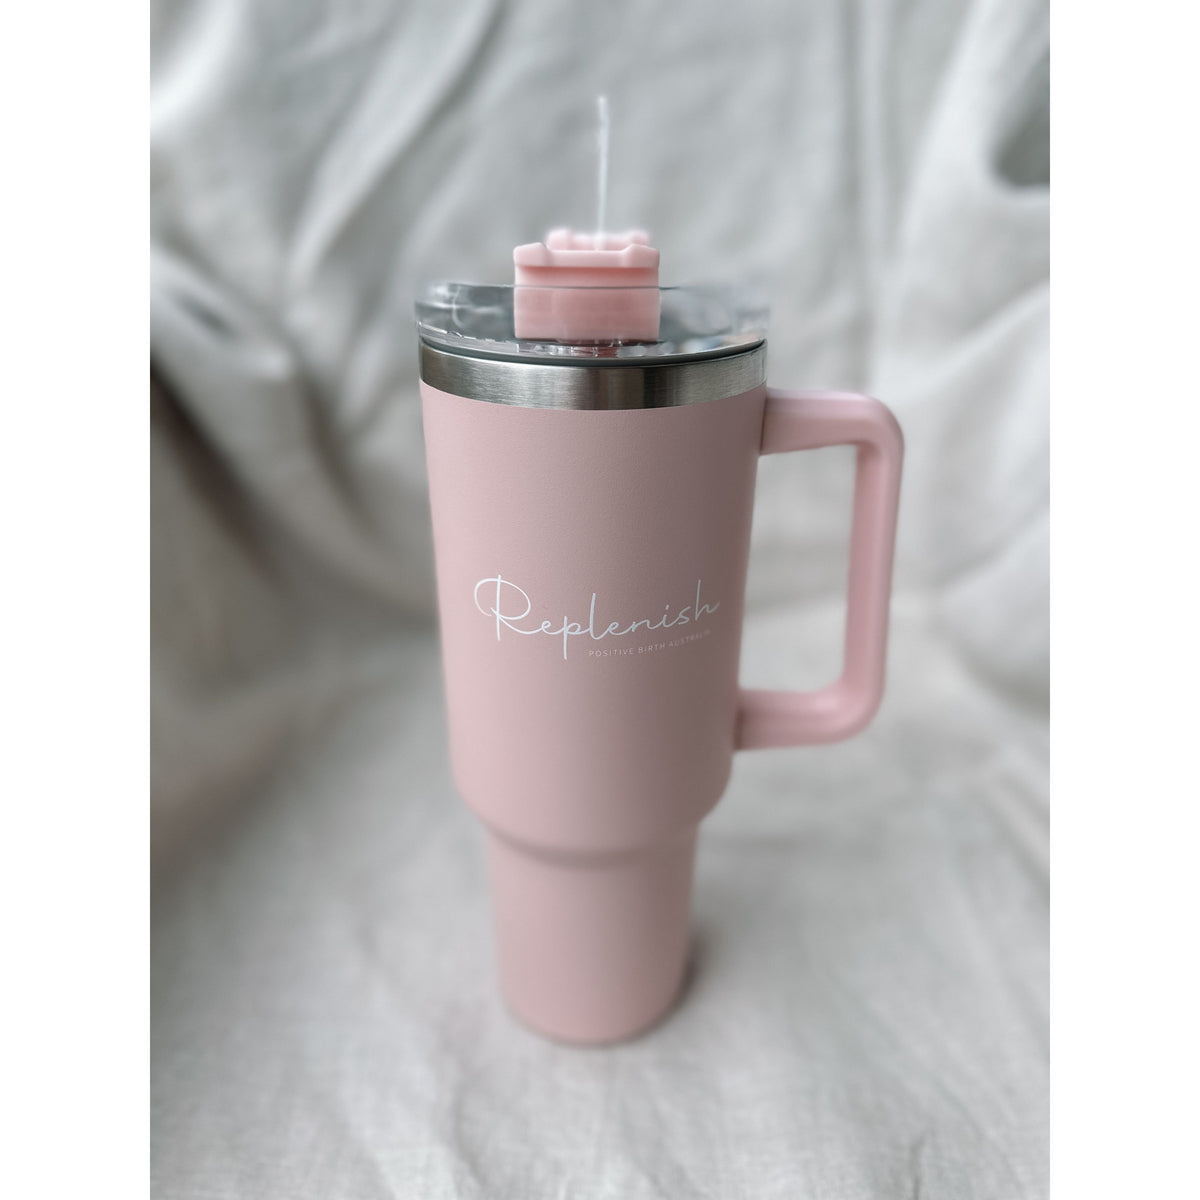 Replenish Pink 1.2L Stainless Steel Double Wall Insulated Tumbler